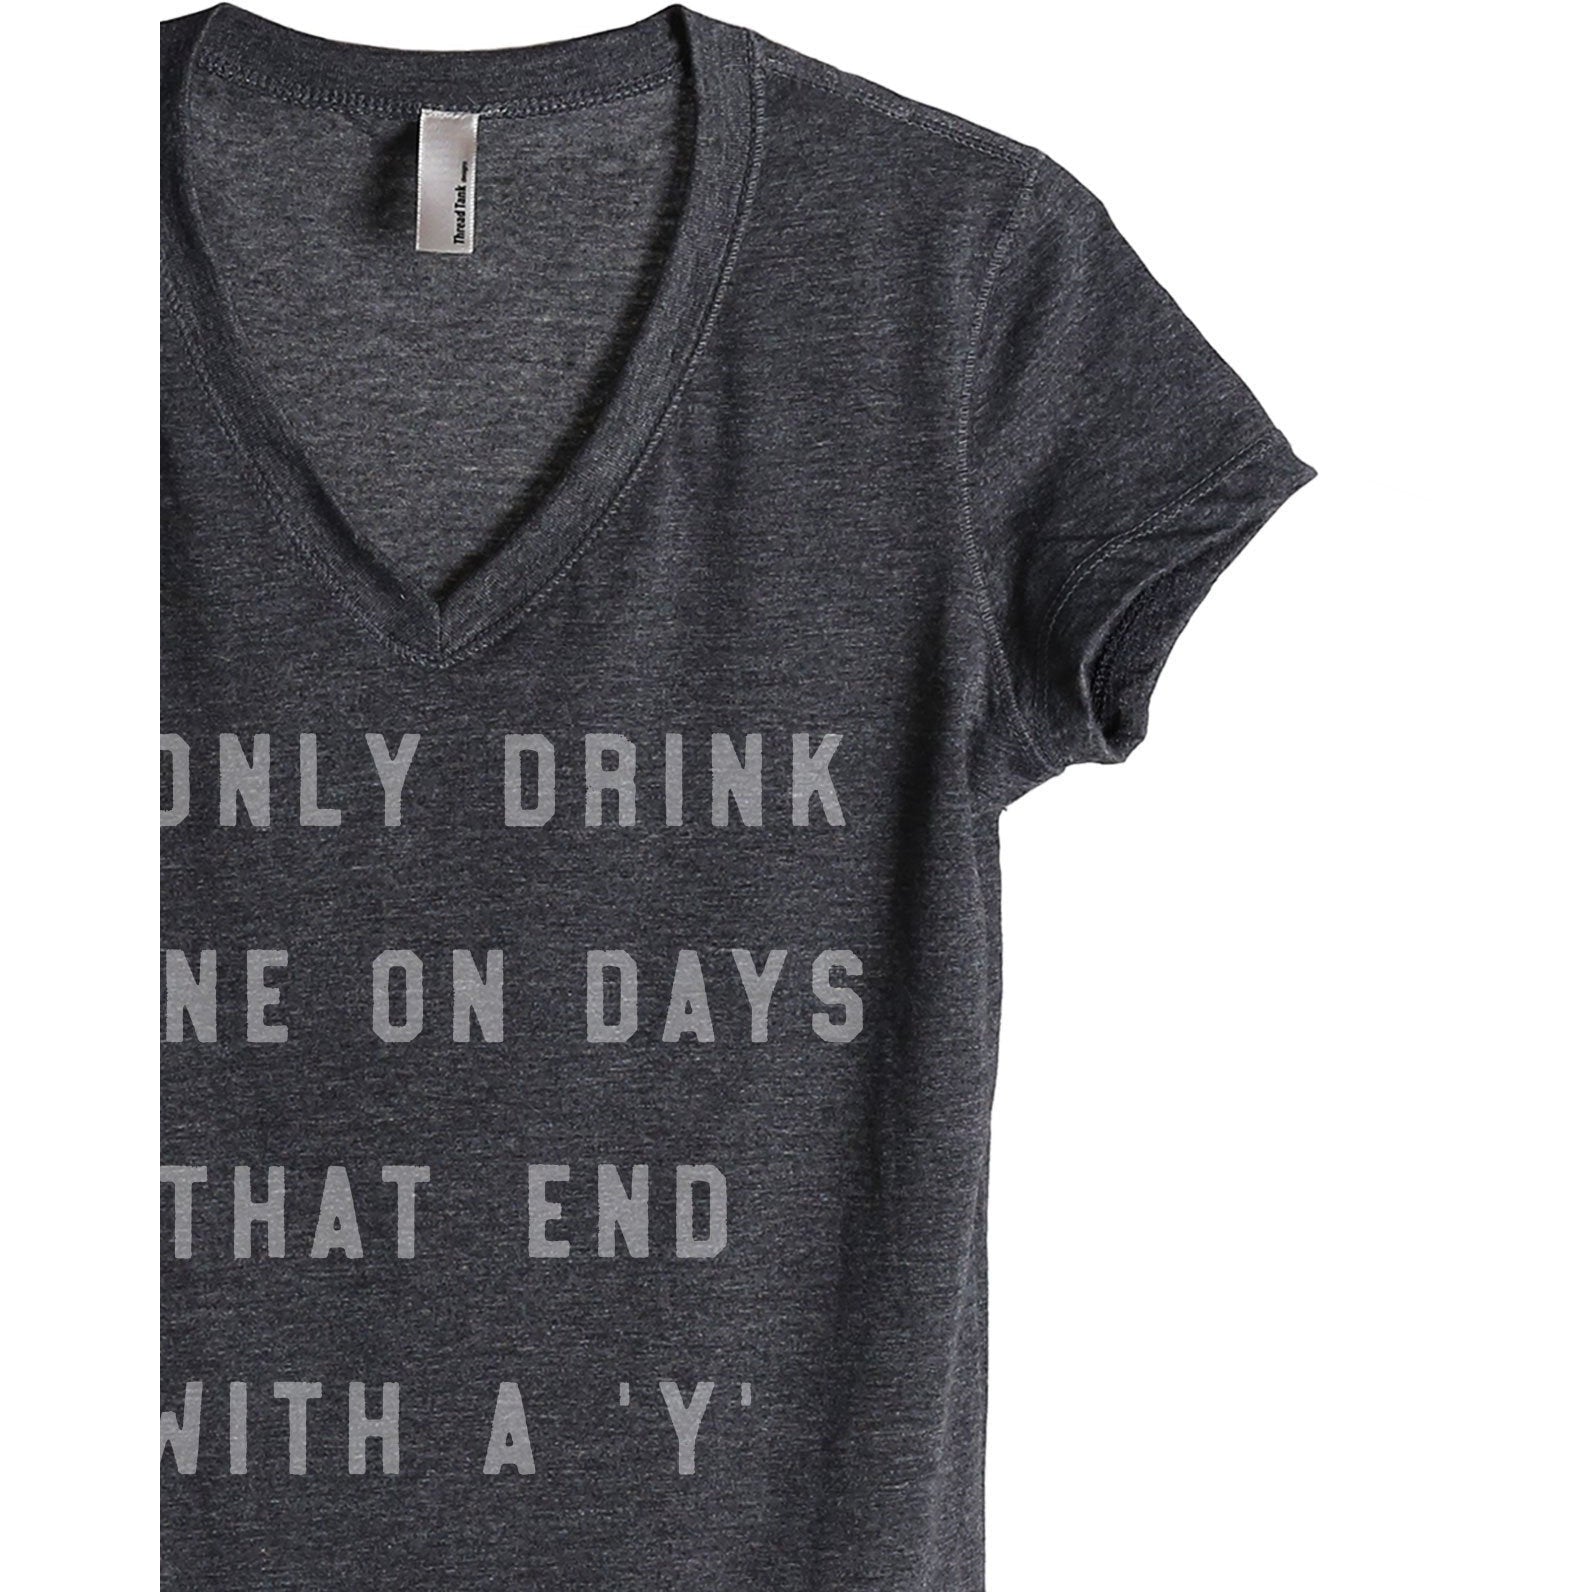 Drink Wine On Days Ends With Y Women's Relaxed Crewneck T-Shirt Top Tee Charcoal Grey Zoom Details
